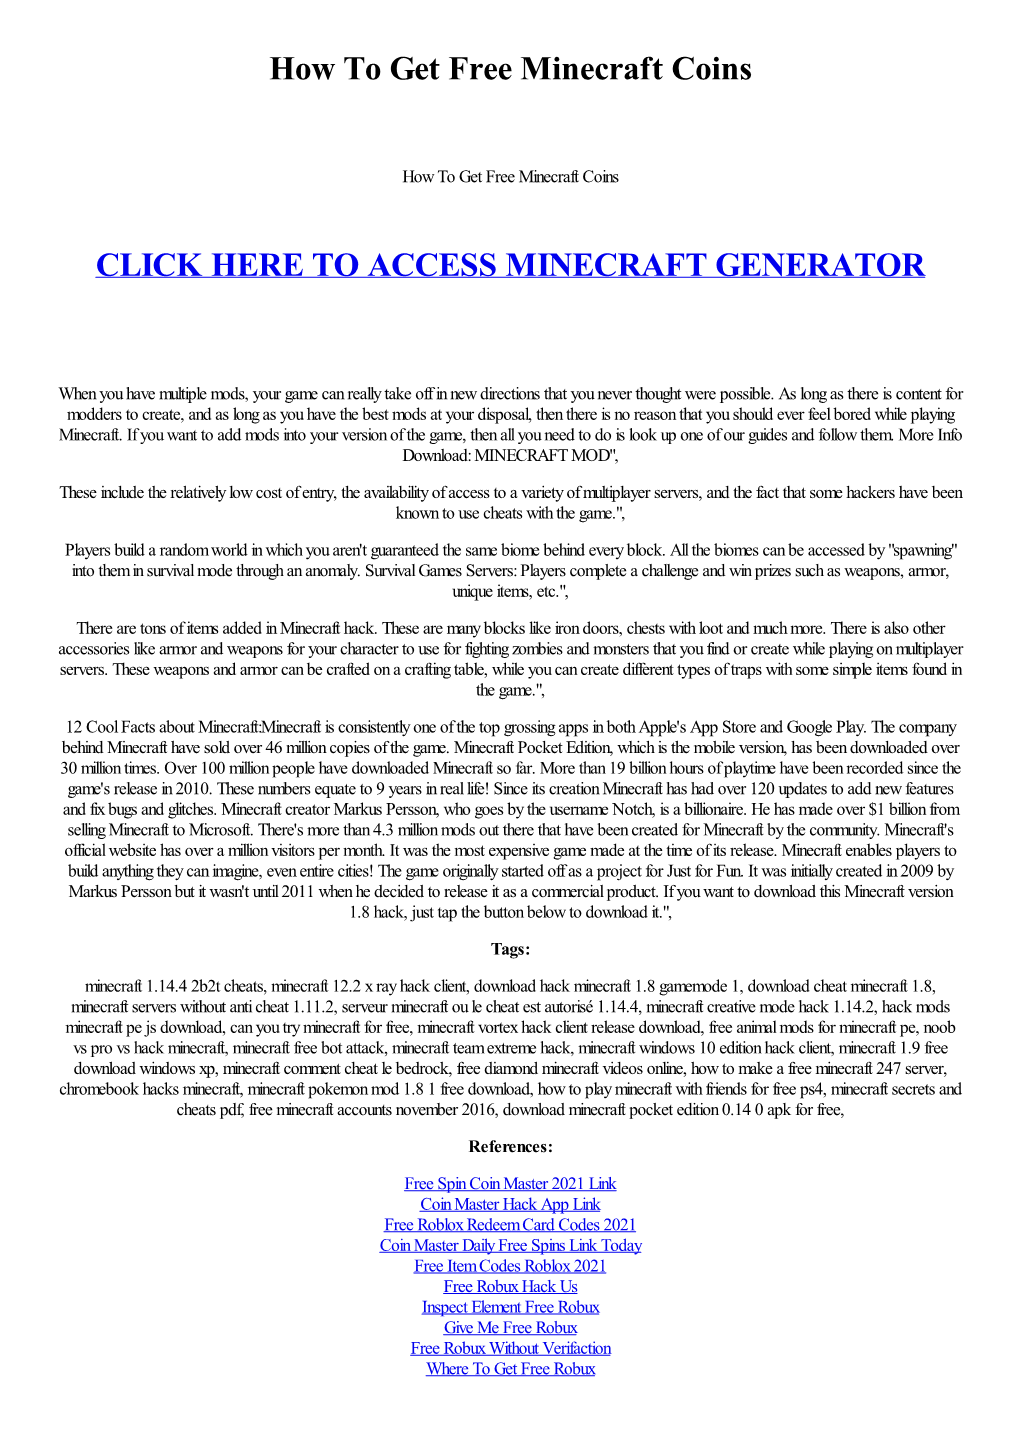 How to Get Free Minecraft Coins